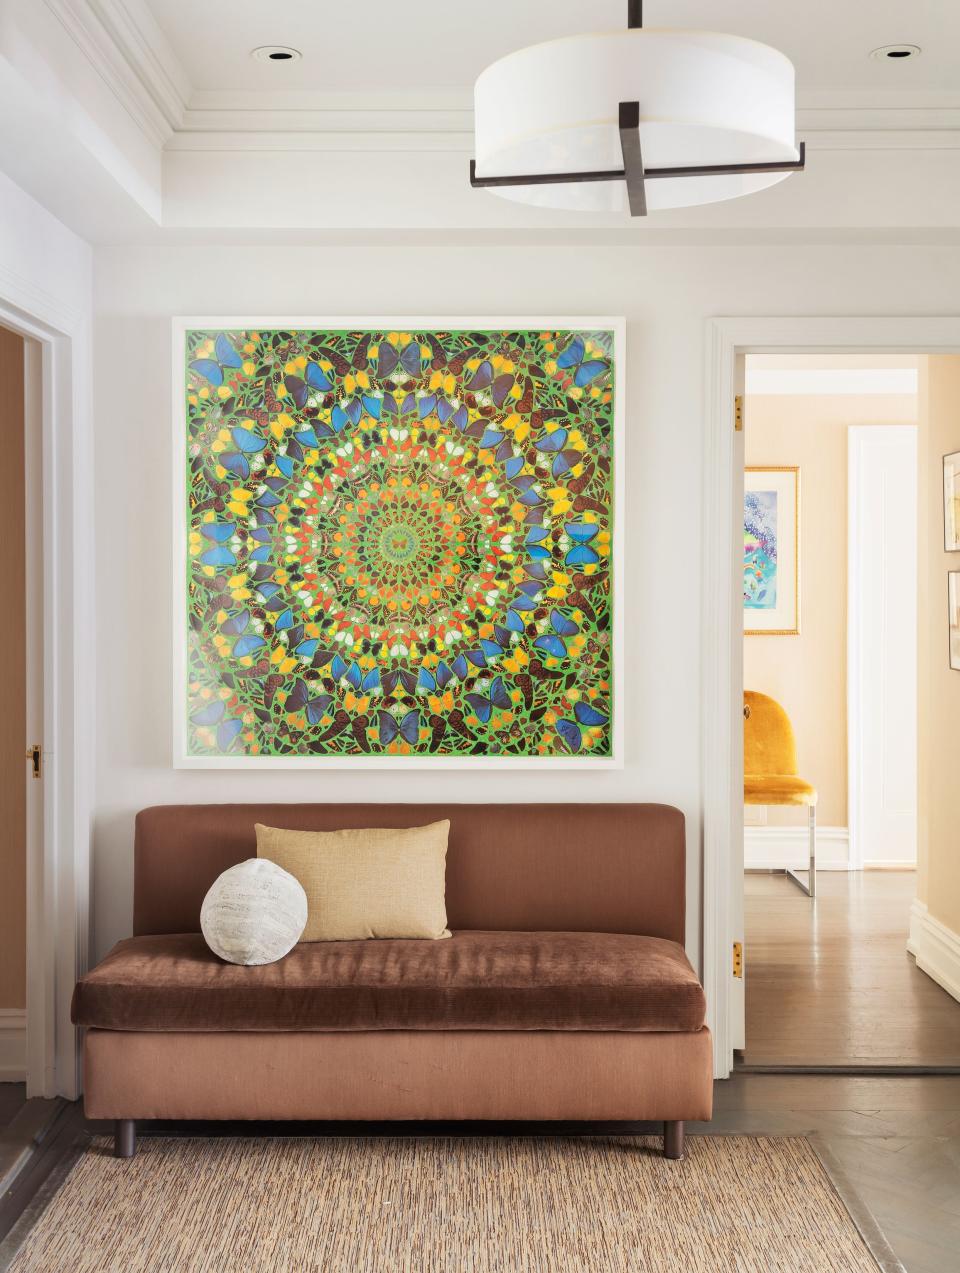 The apartment’s entryway features a custom armless banquette upholstered in Holland & Sherry velvet, and a custom metal and parchment pendant designed by Huniford. The striking artwork is by Damien Hirst.